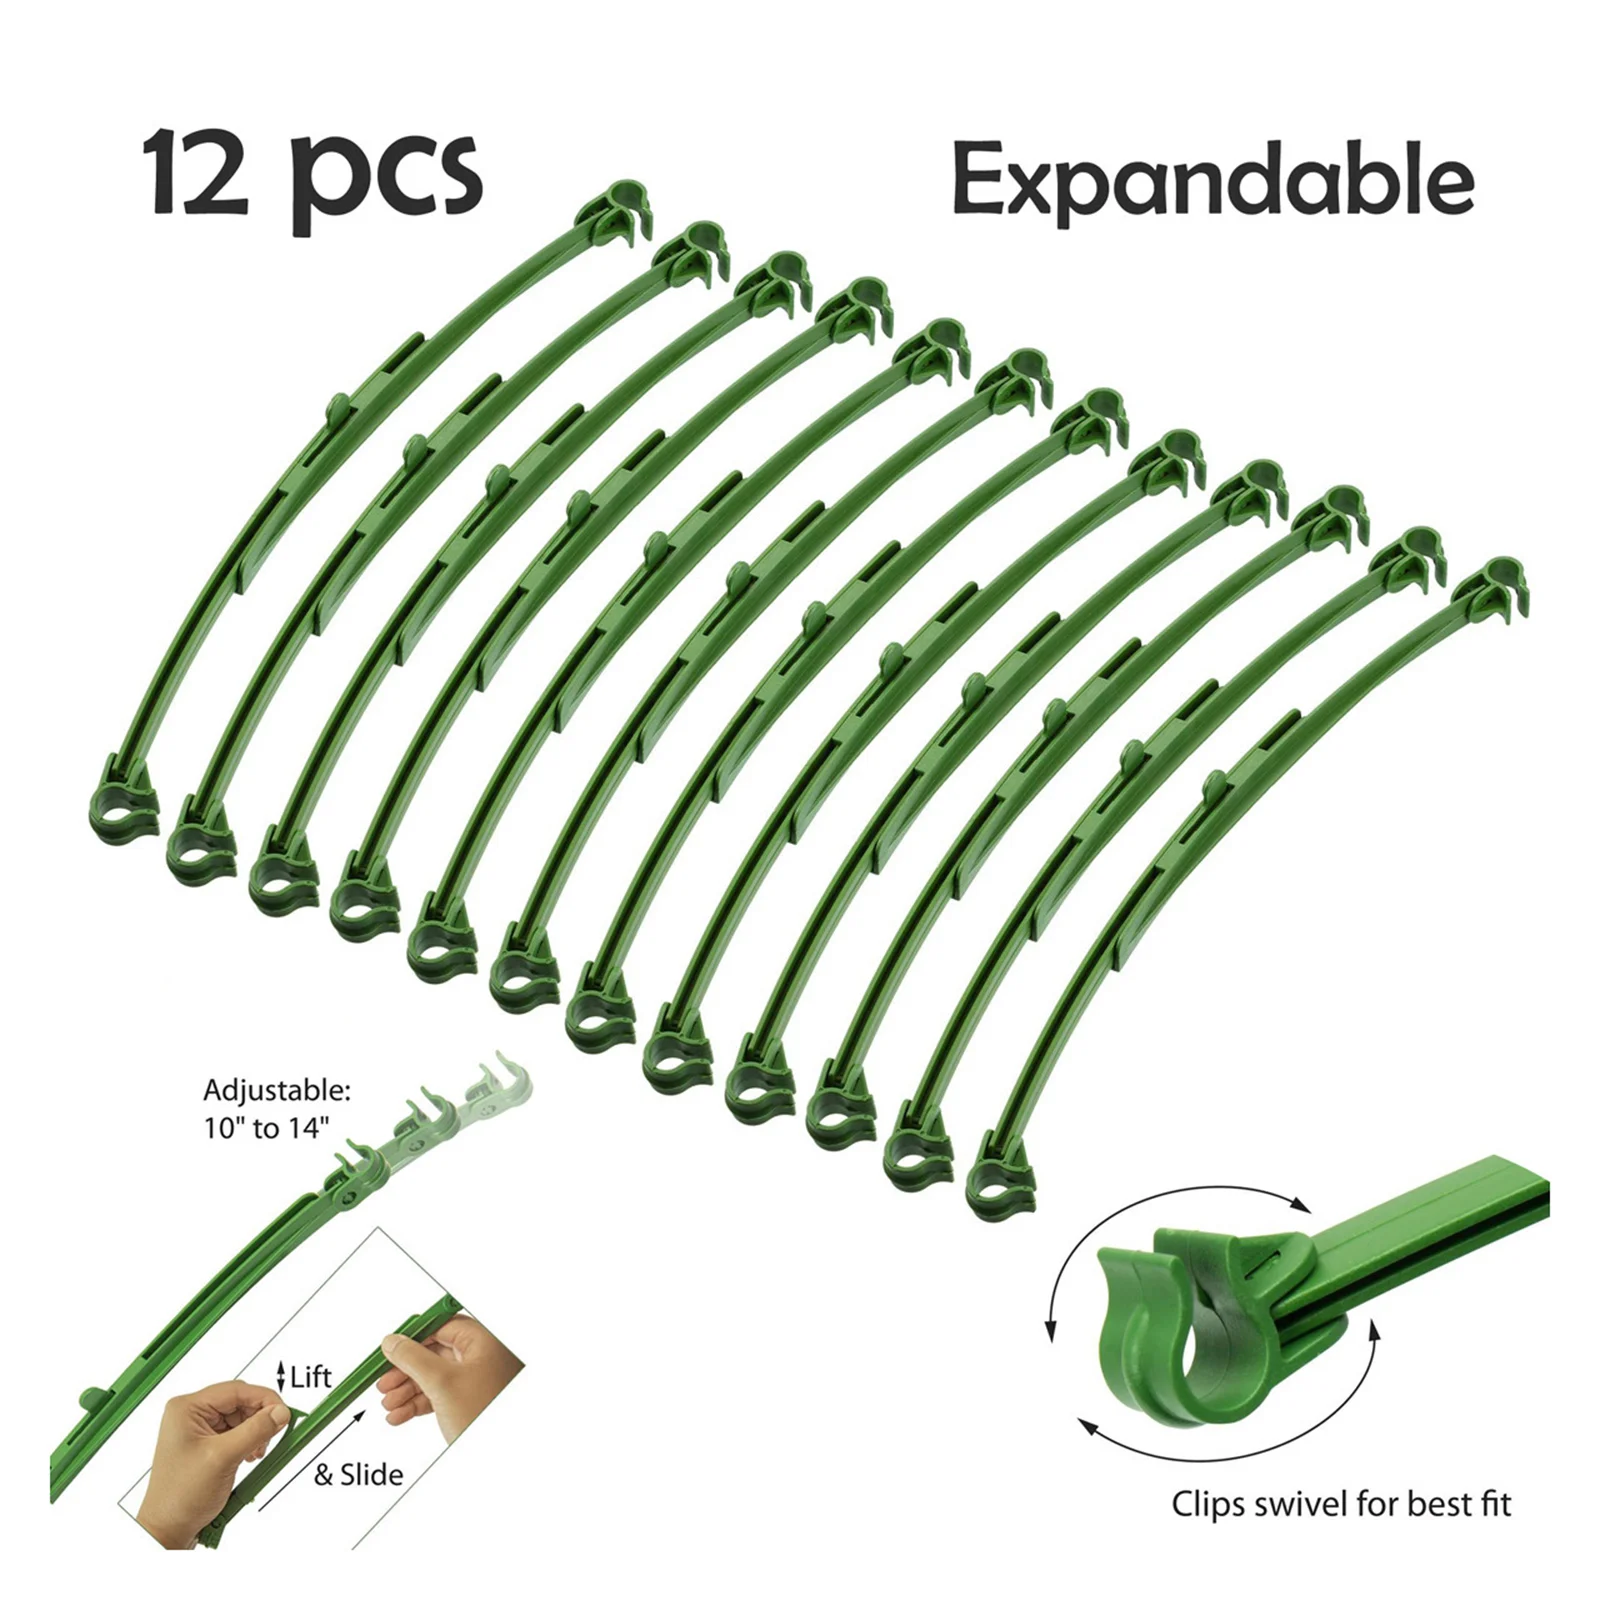 Details about   12pcs Garden Growth Aid Tomato Stem Stake Arm Support Plant Wire Rack 